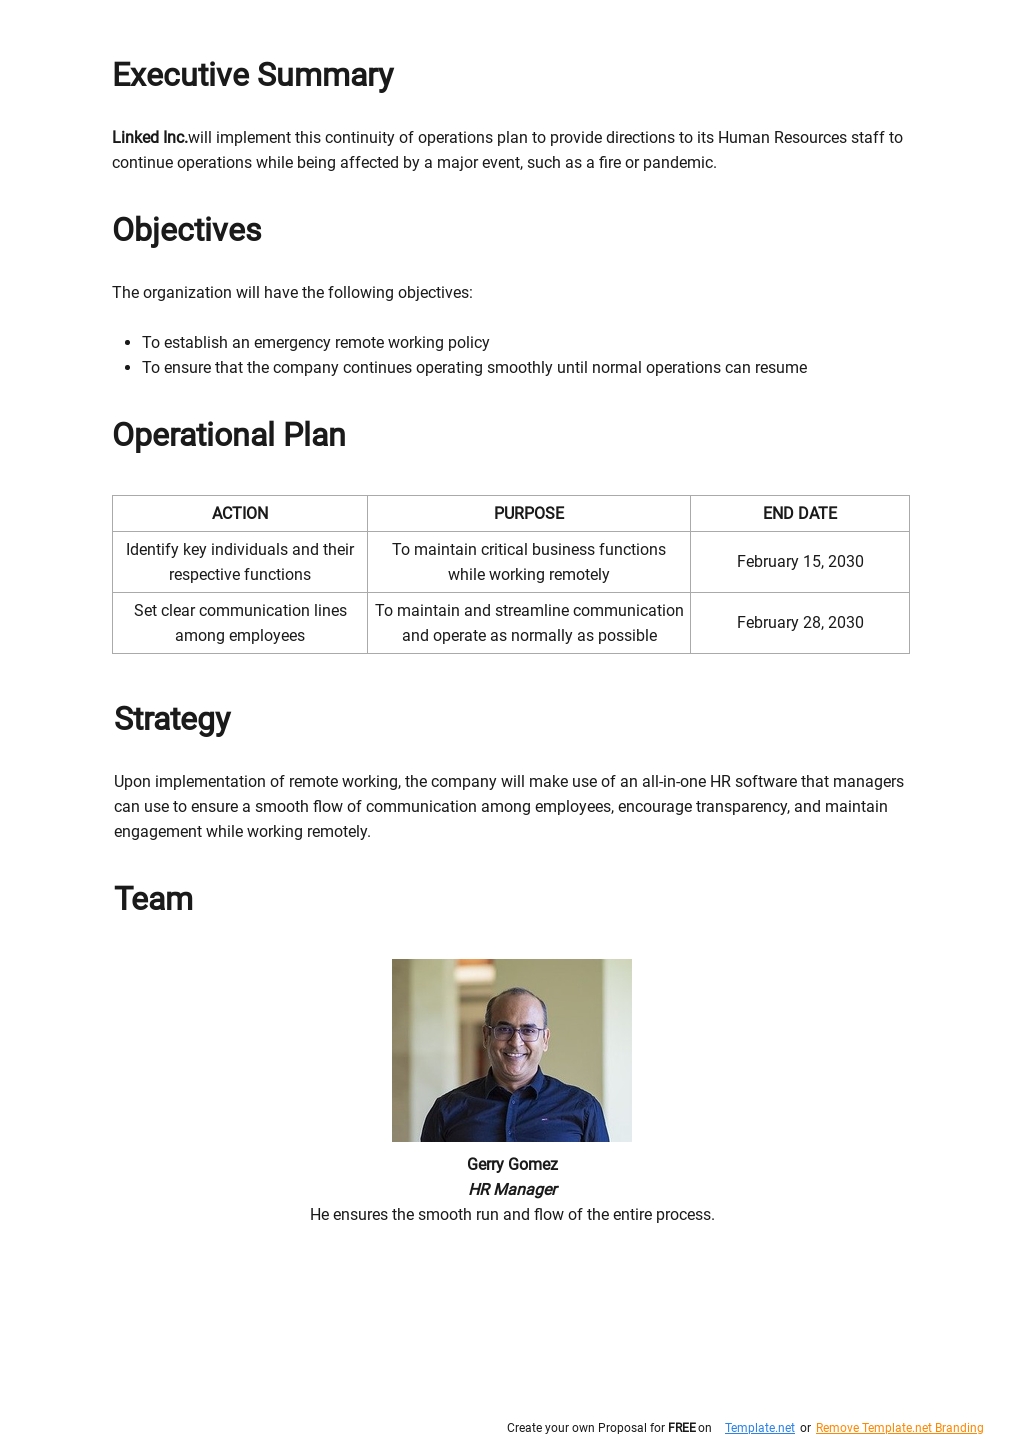 Human Resources Continuity of Operations Plan Template 1.jpe